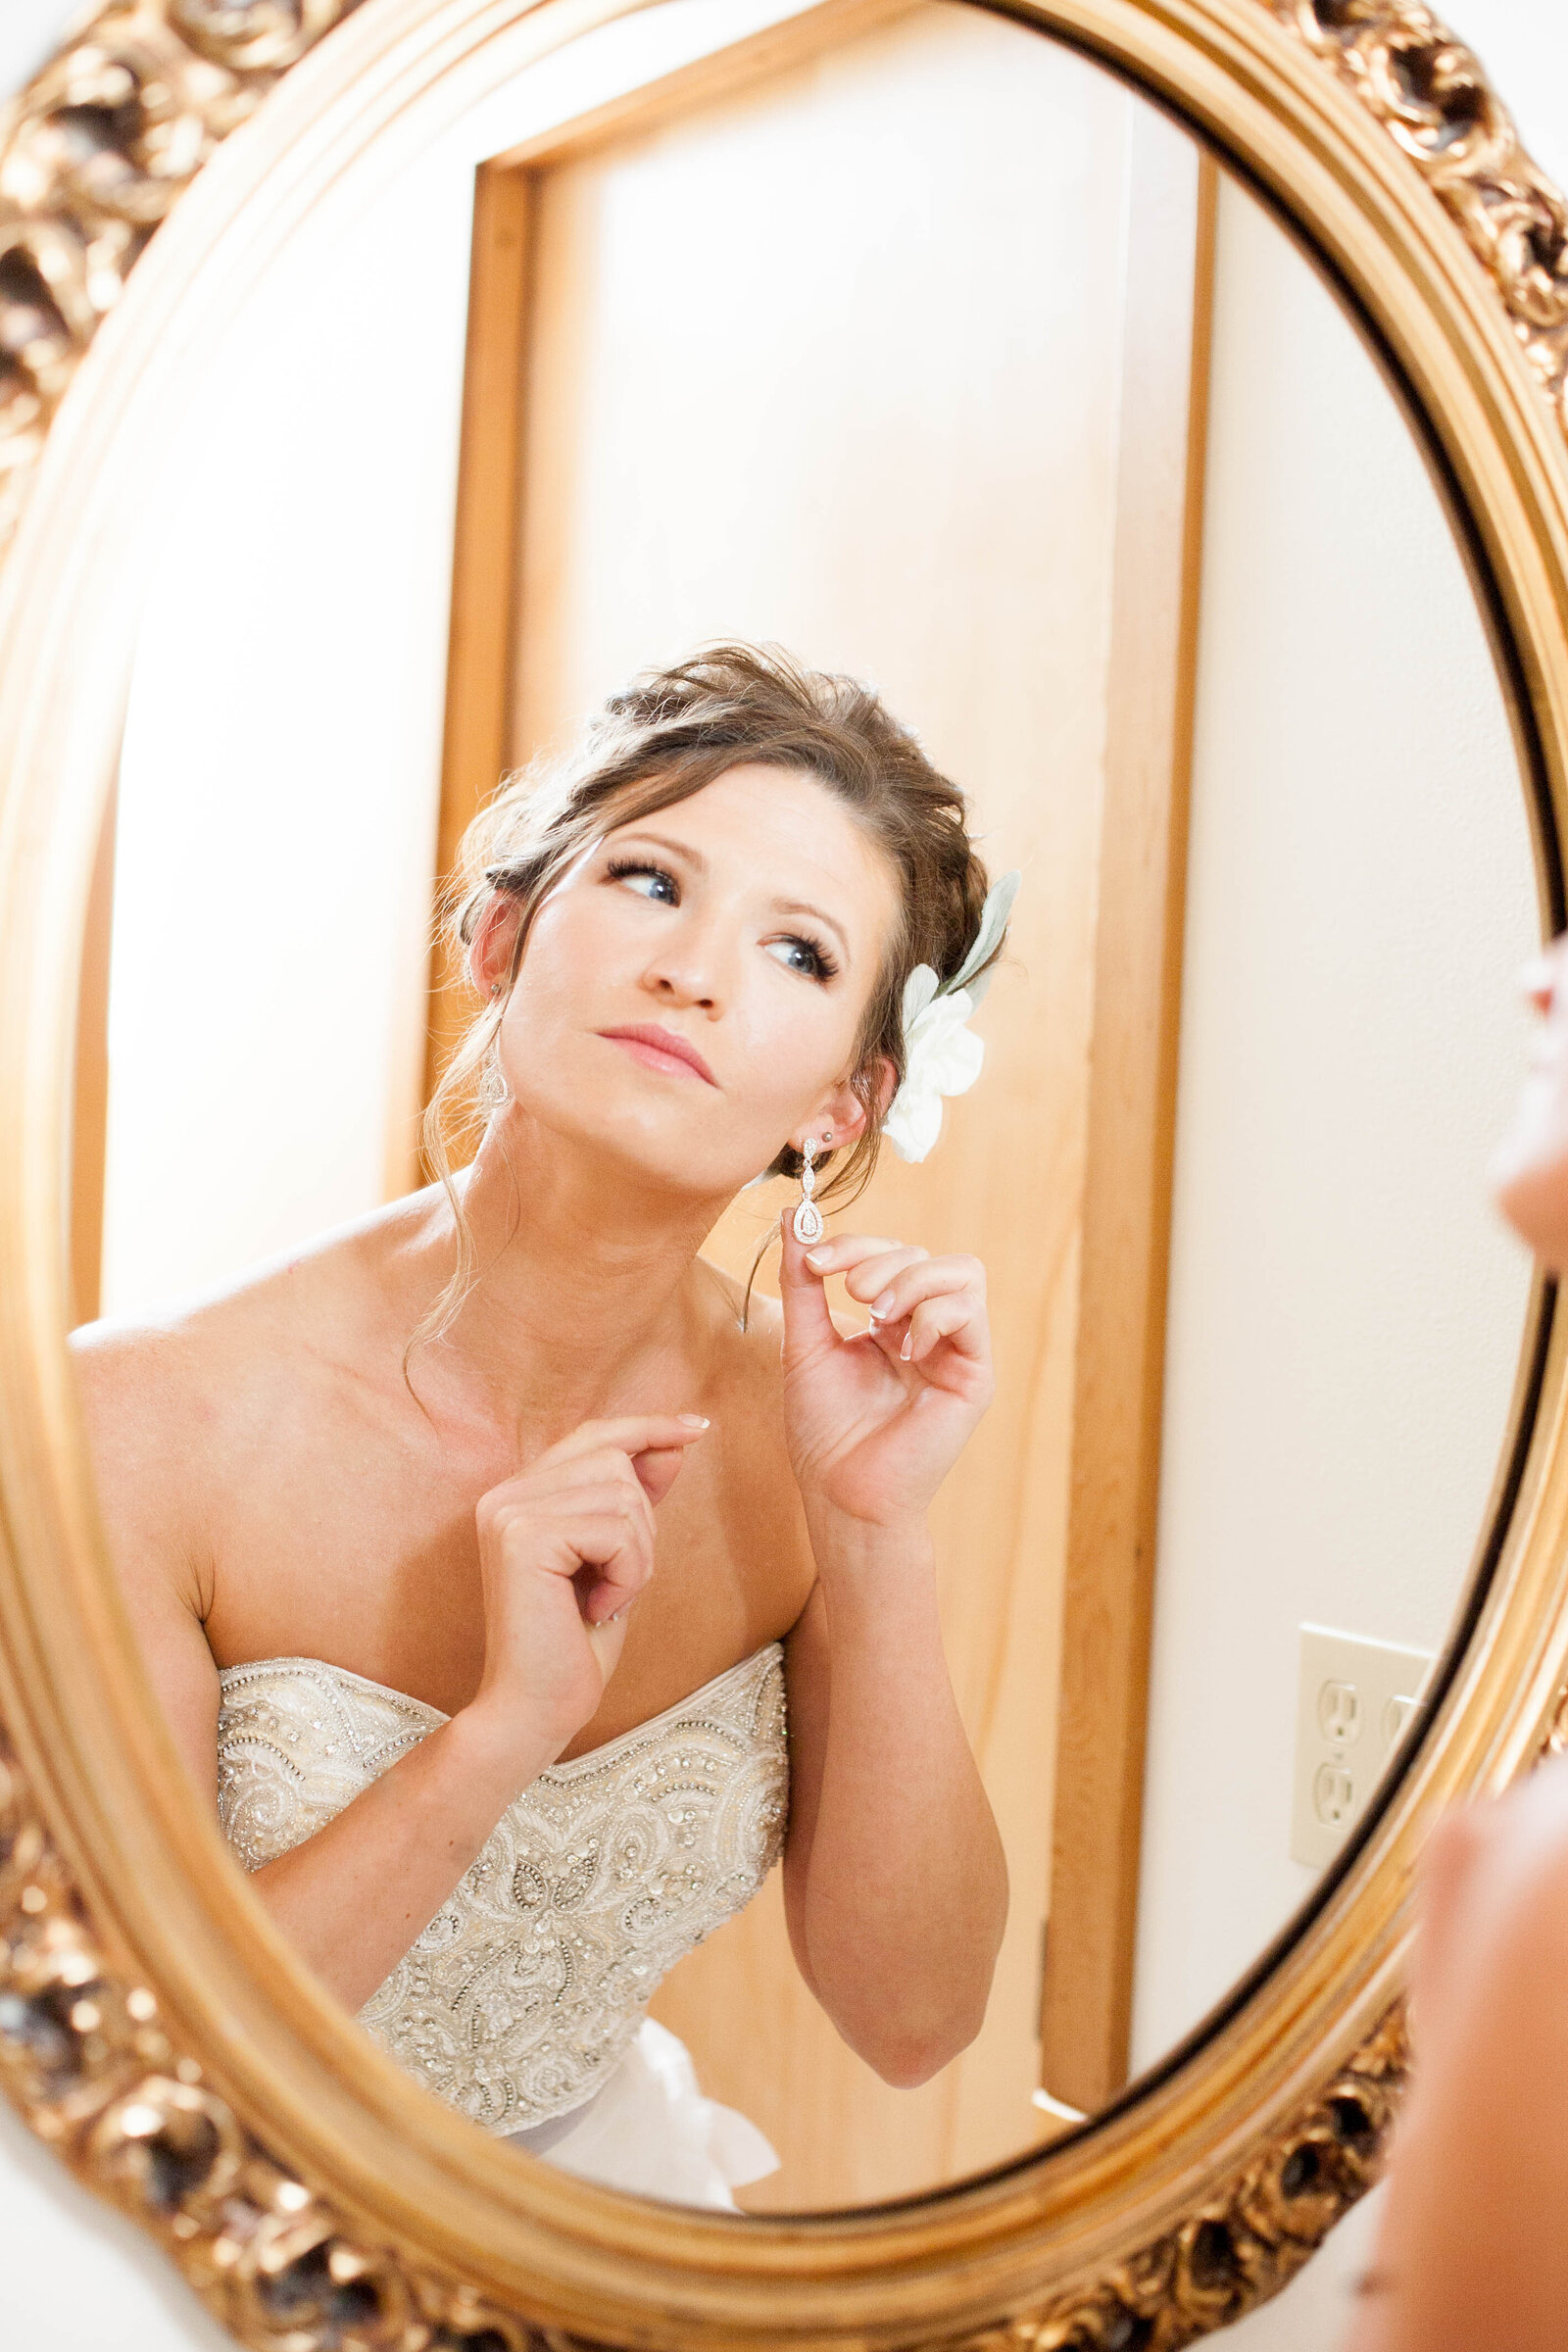 A woman putting on earrings in a mirror.